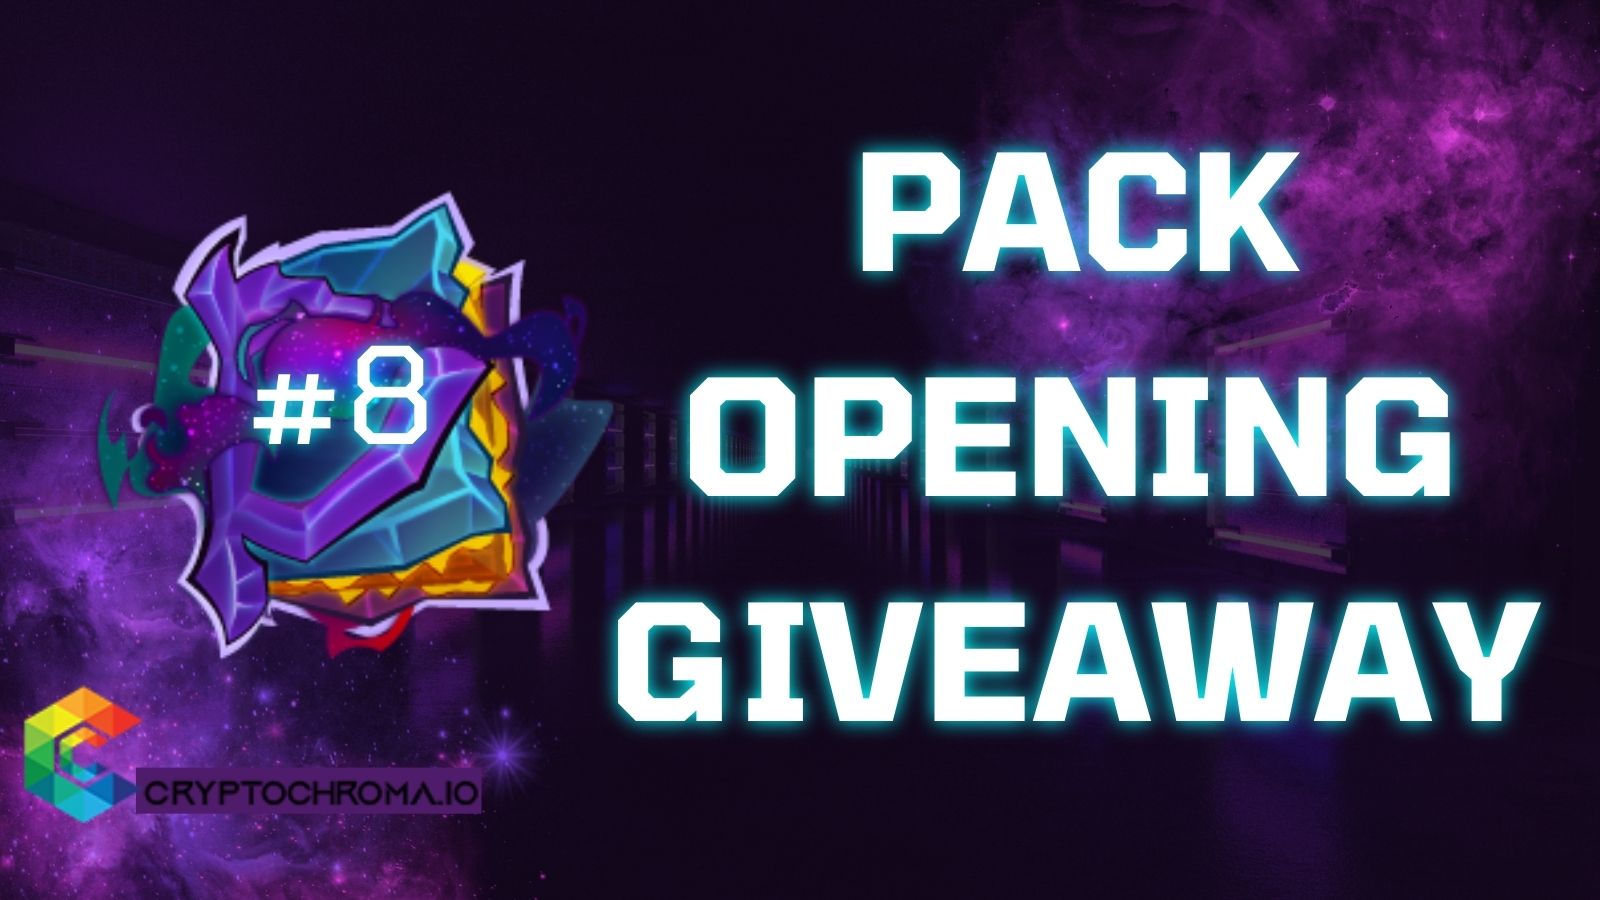 @cryptochroma/splinterlands-pack-opening-giveaway-8